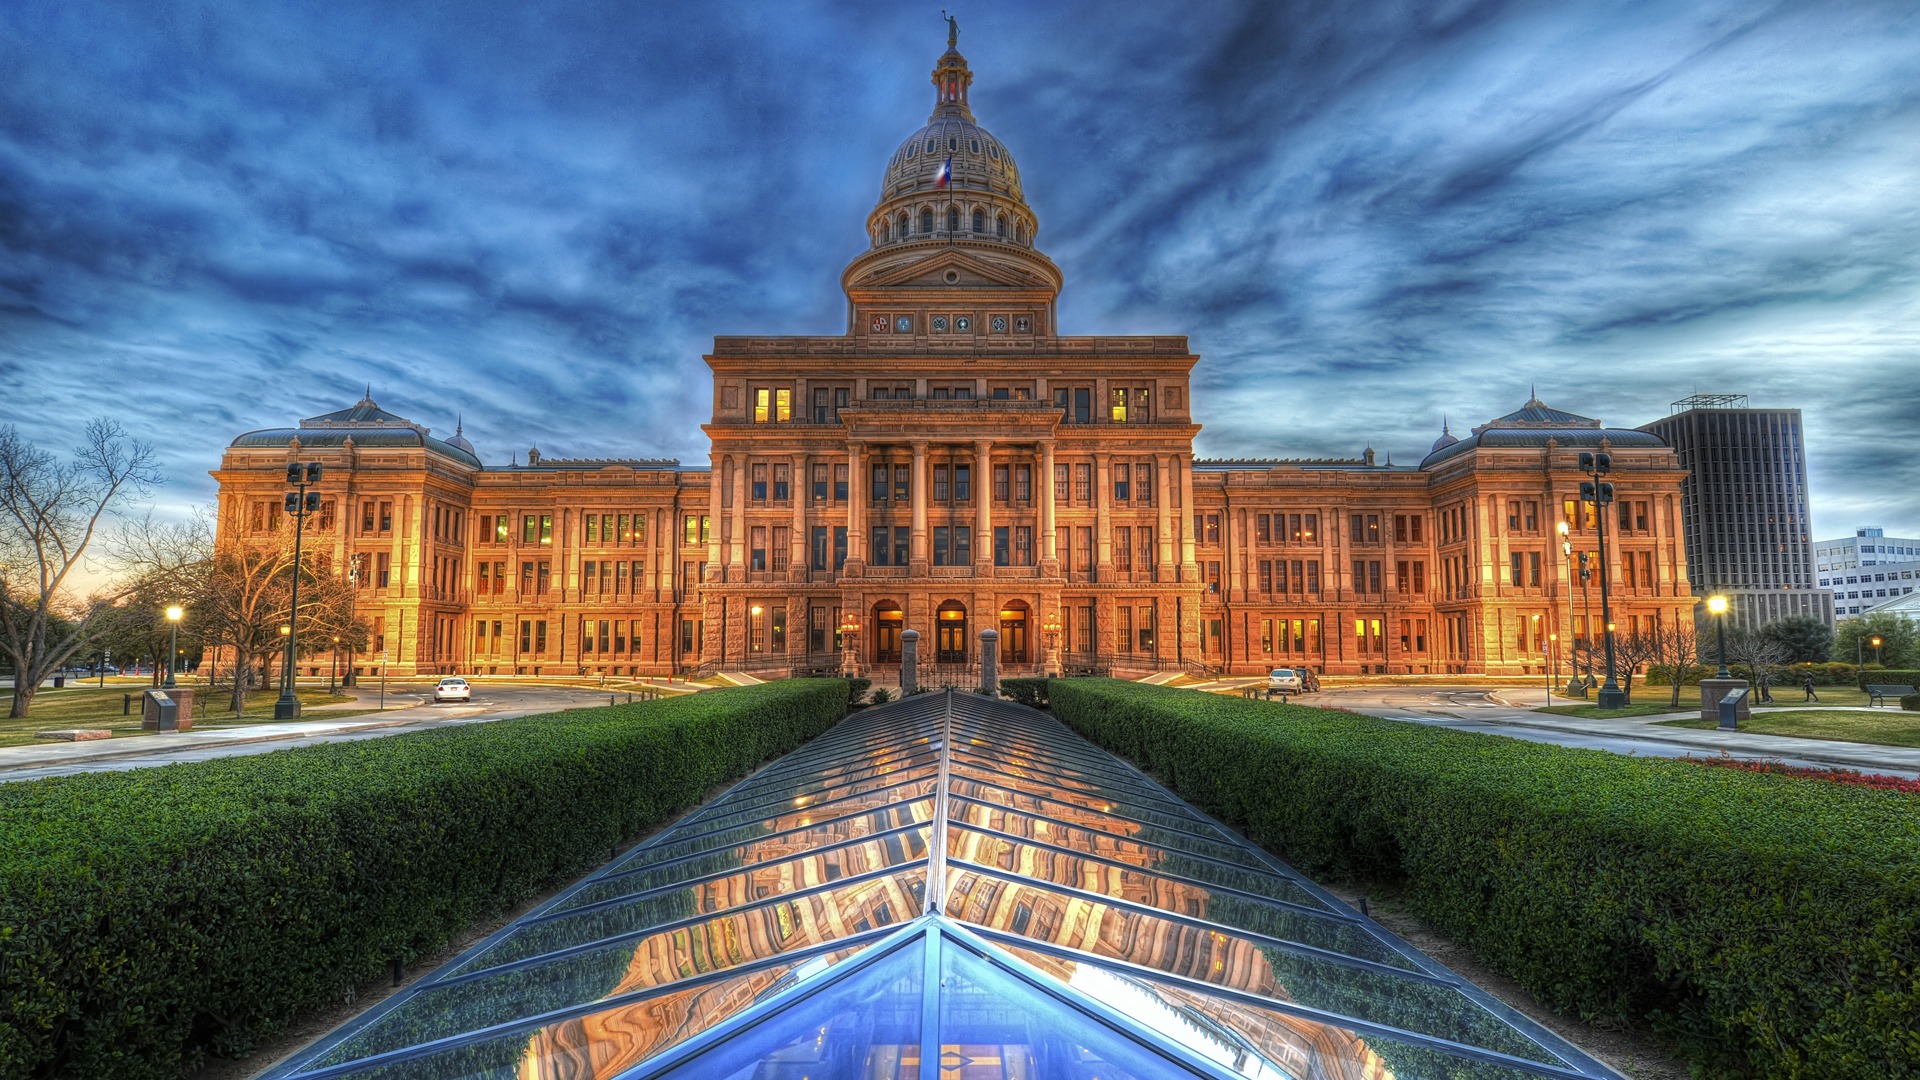 texas, building, man made, hdr High Definition image